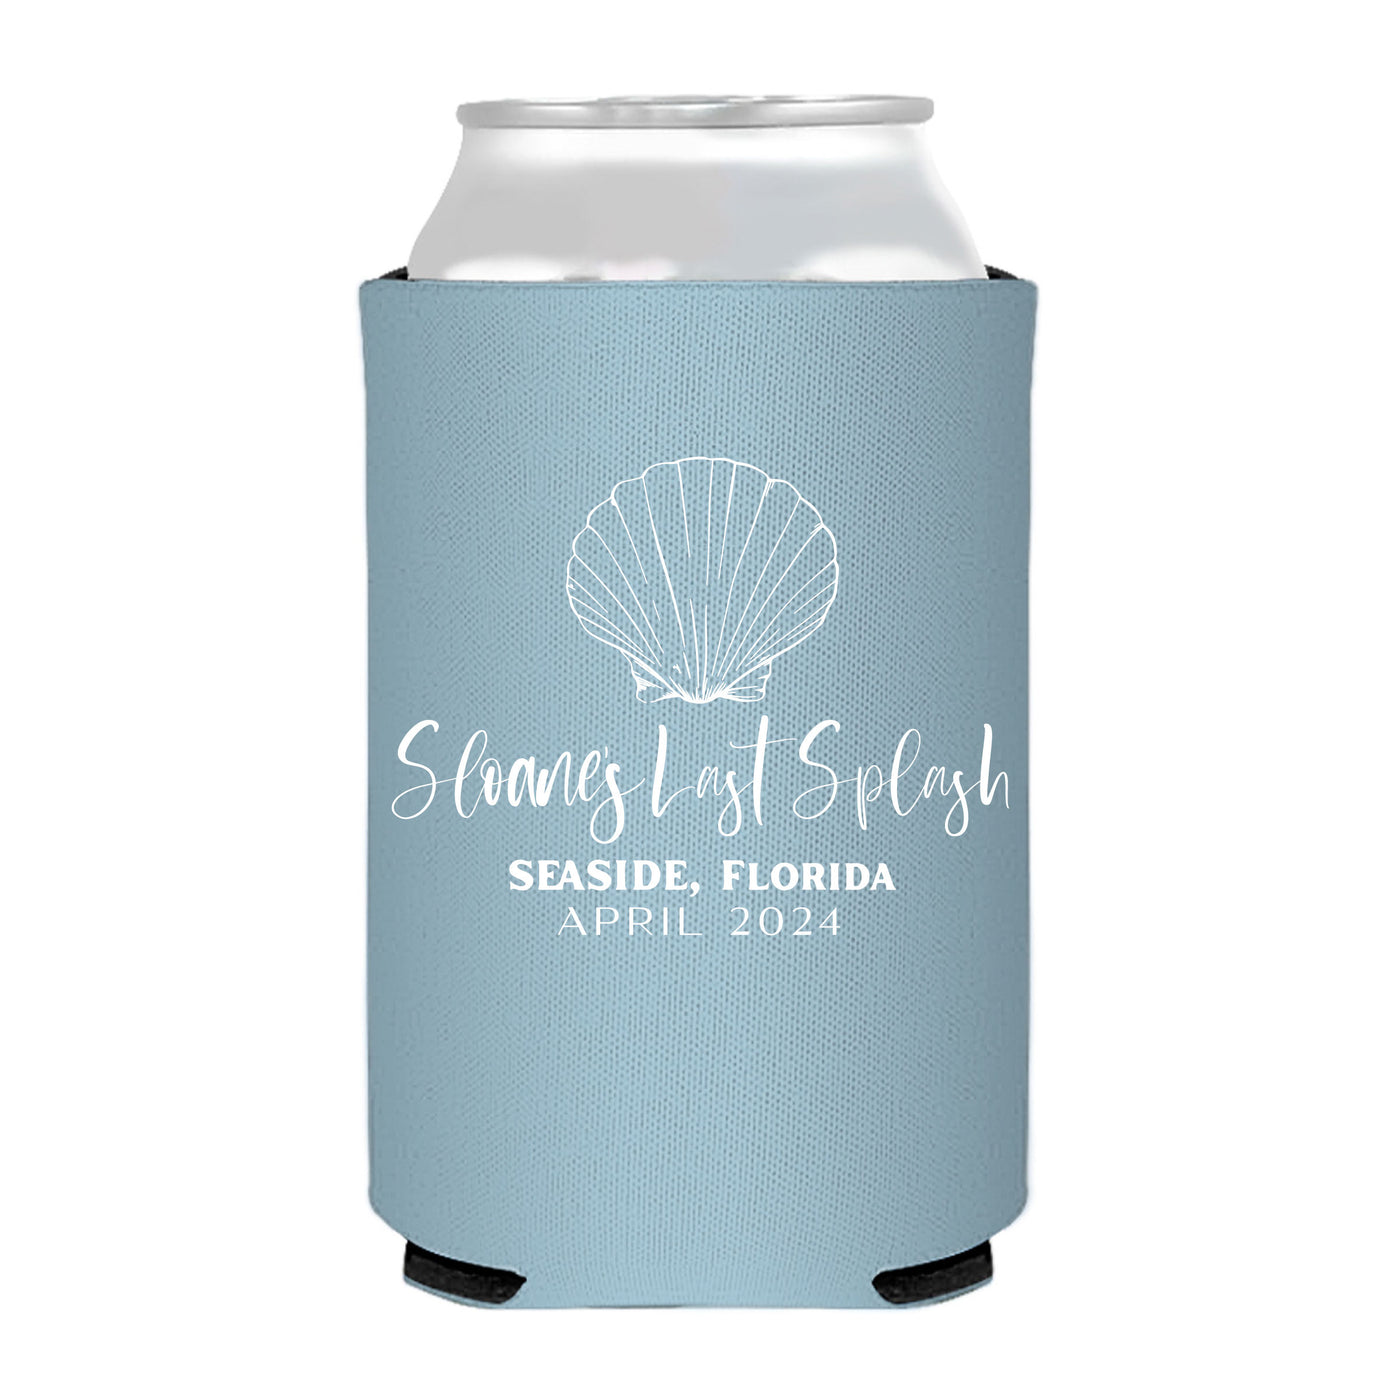 Last Spalsh Sea Shell Bachelorette Party Can Cooler